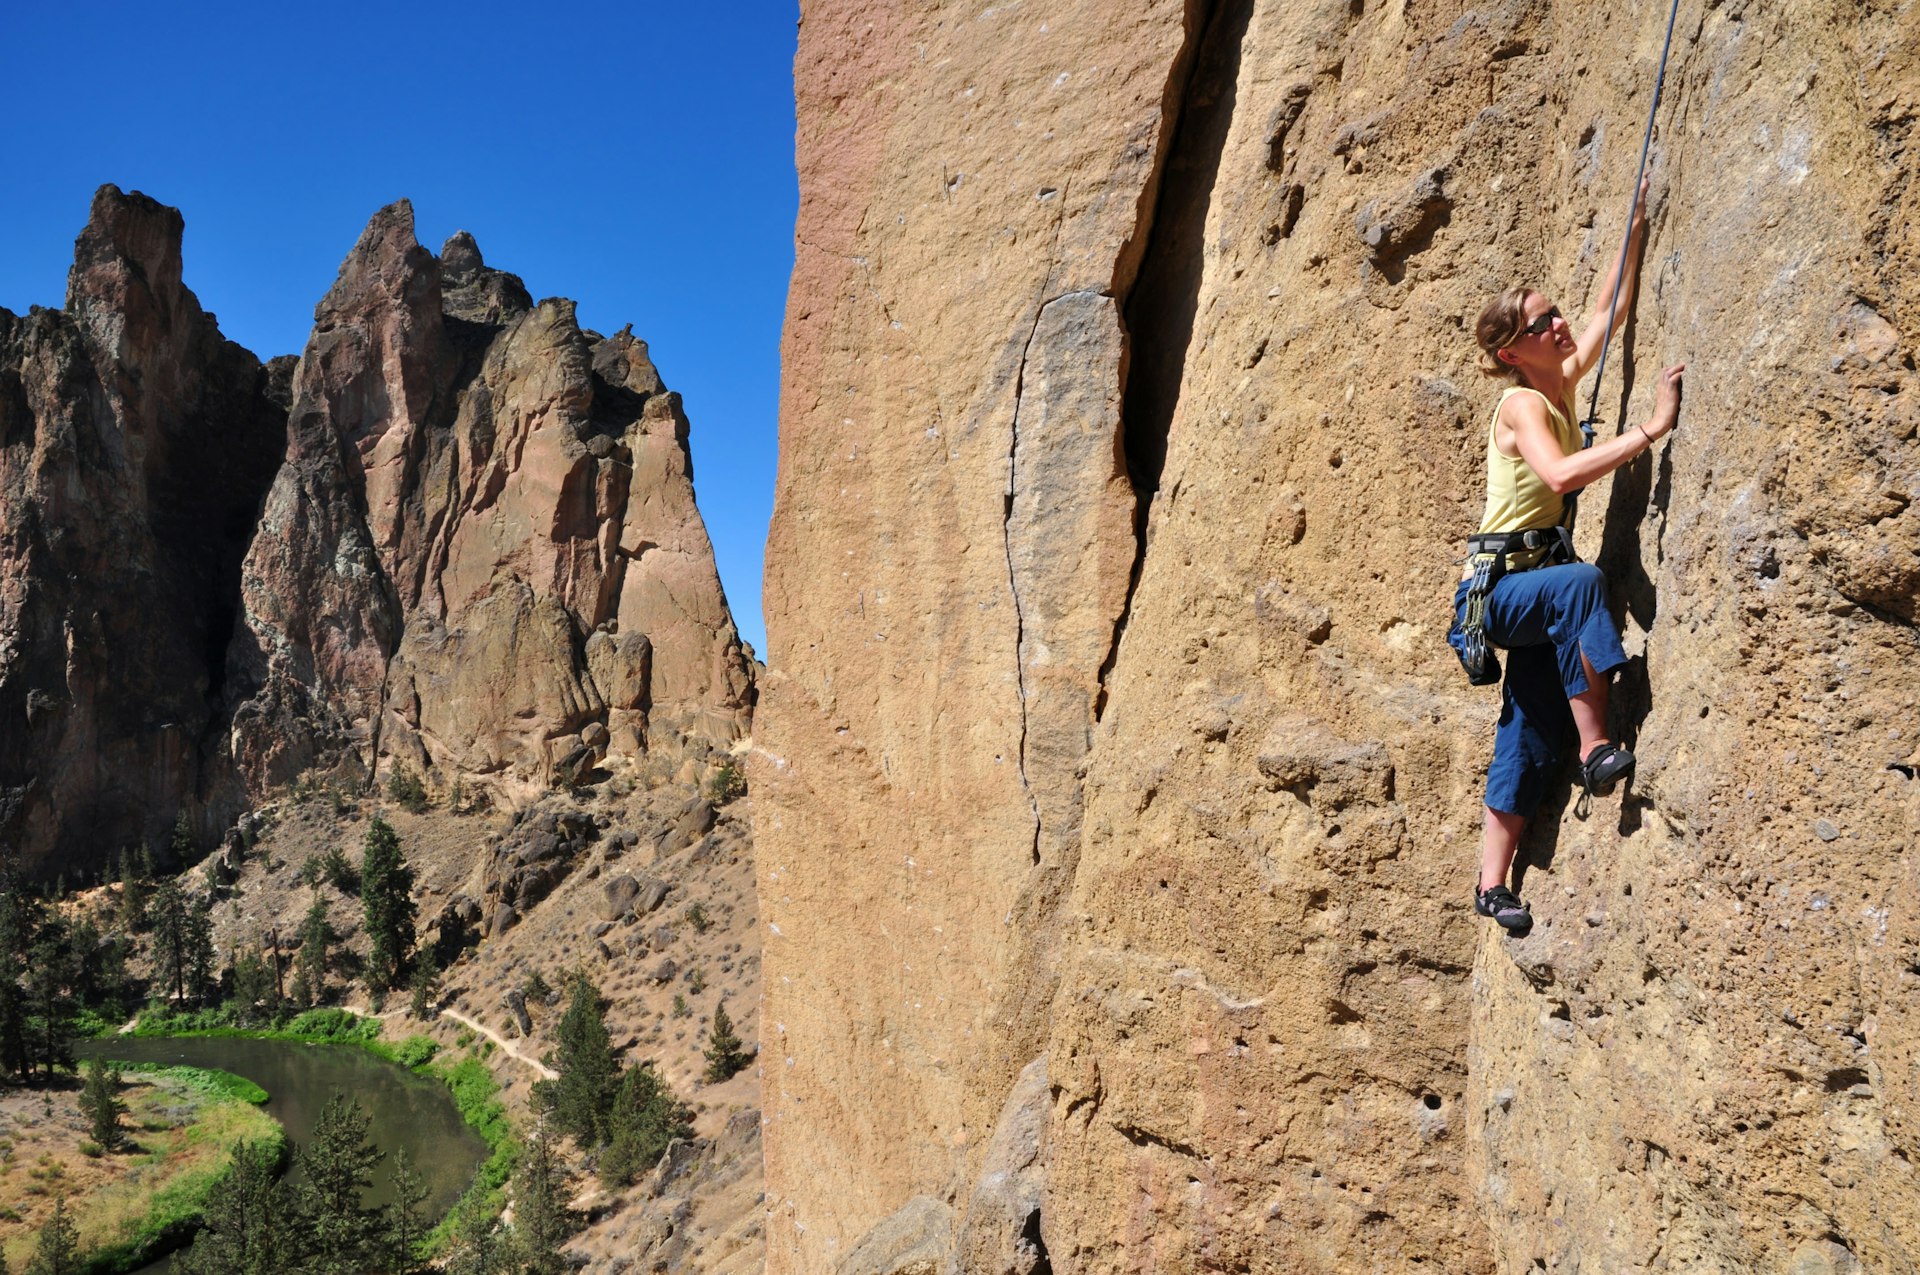 A female rock climber ascends a cliff at Smith Rock State Park